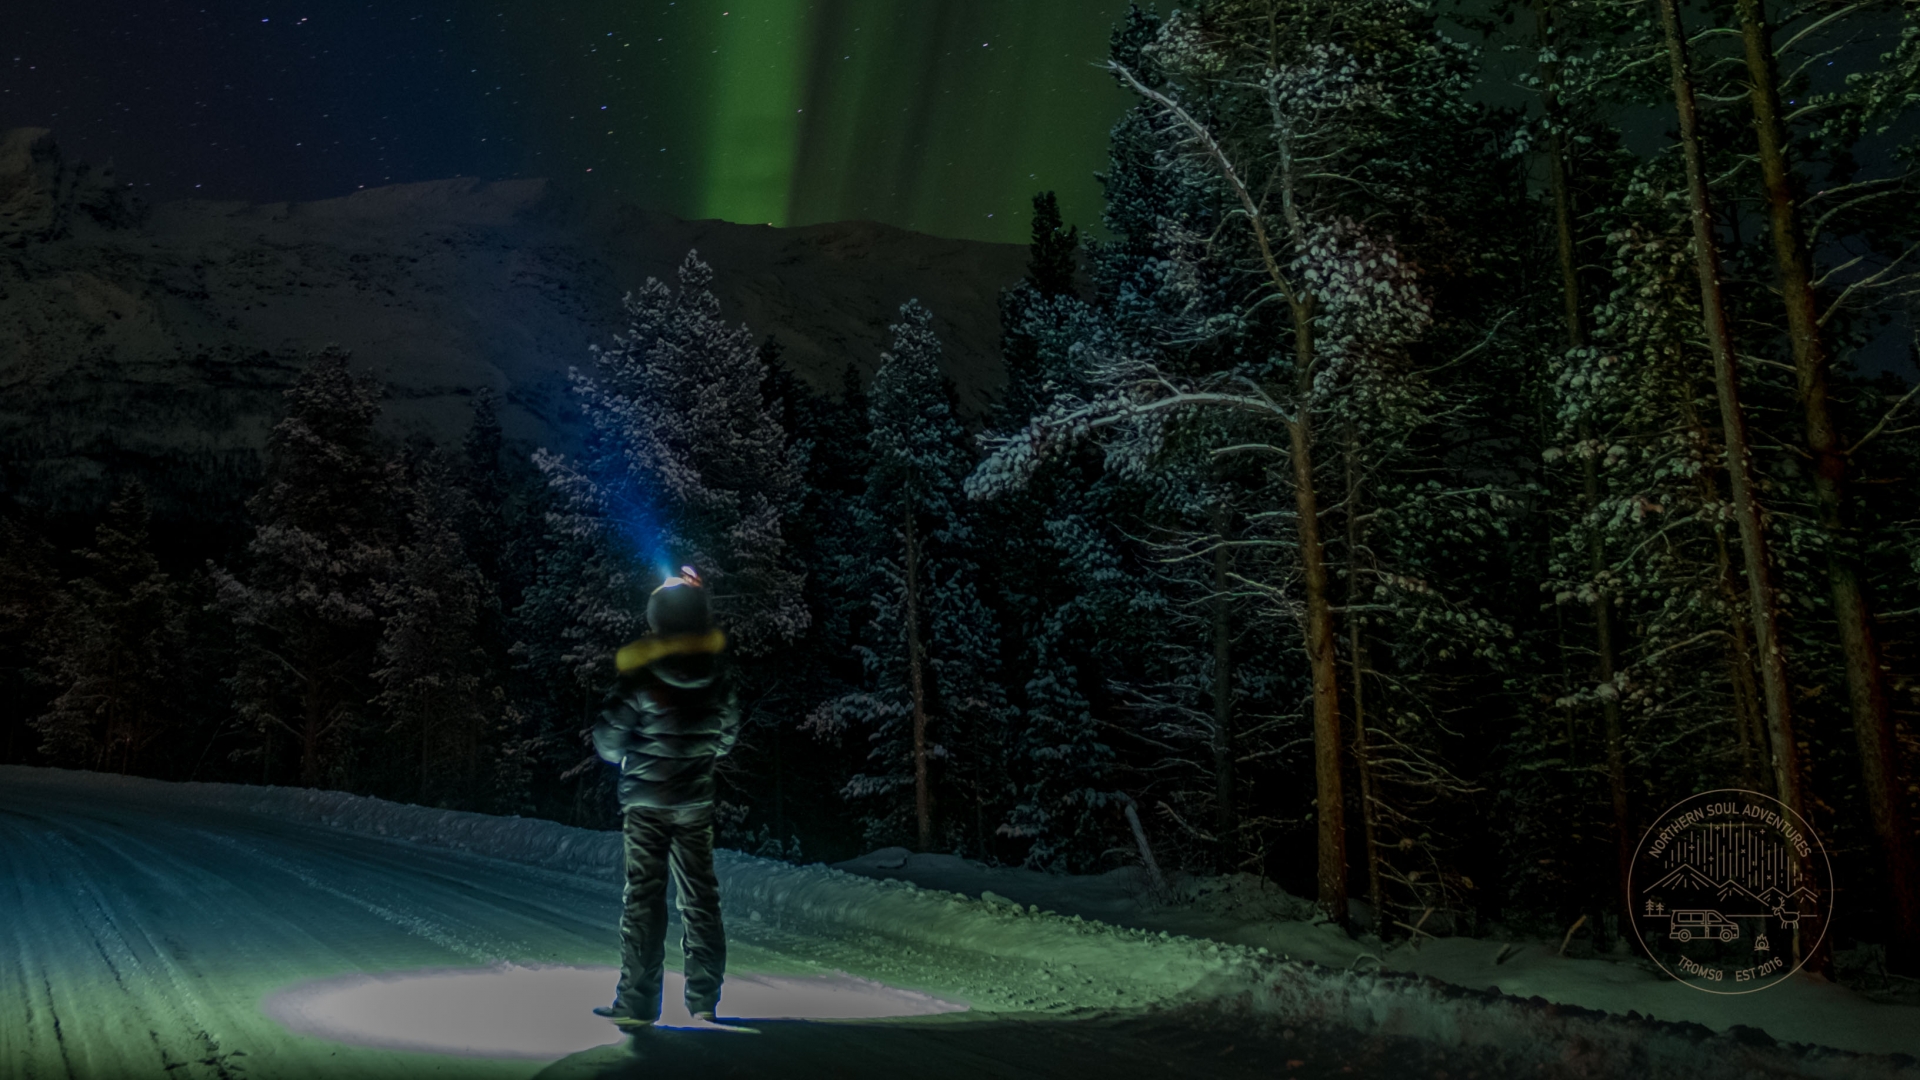 Man watching the Northern Lights from a forest road